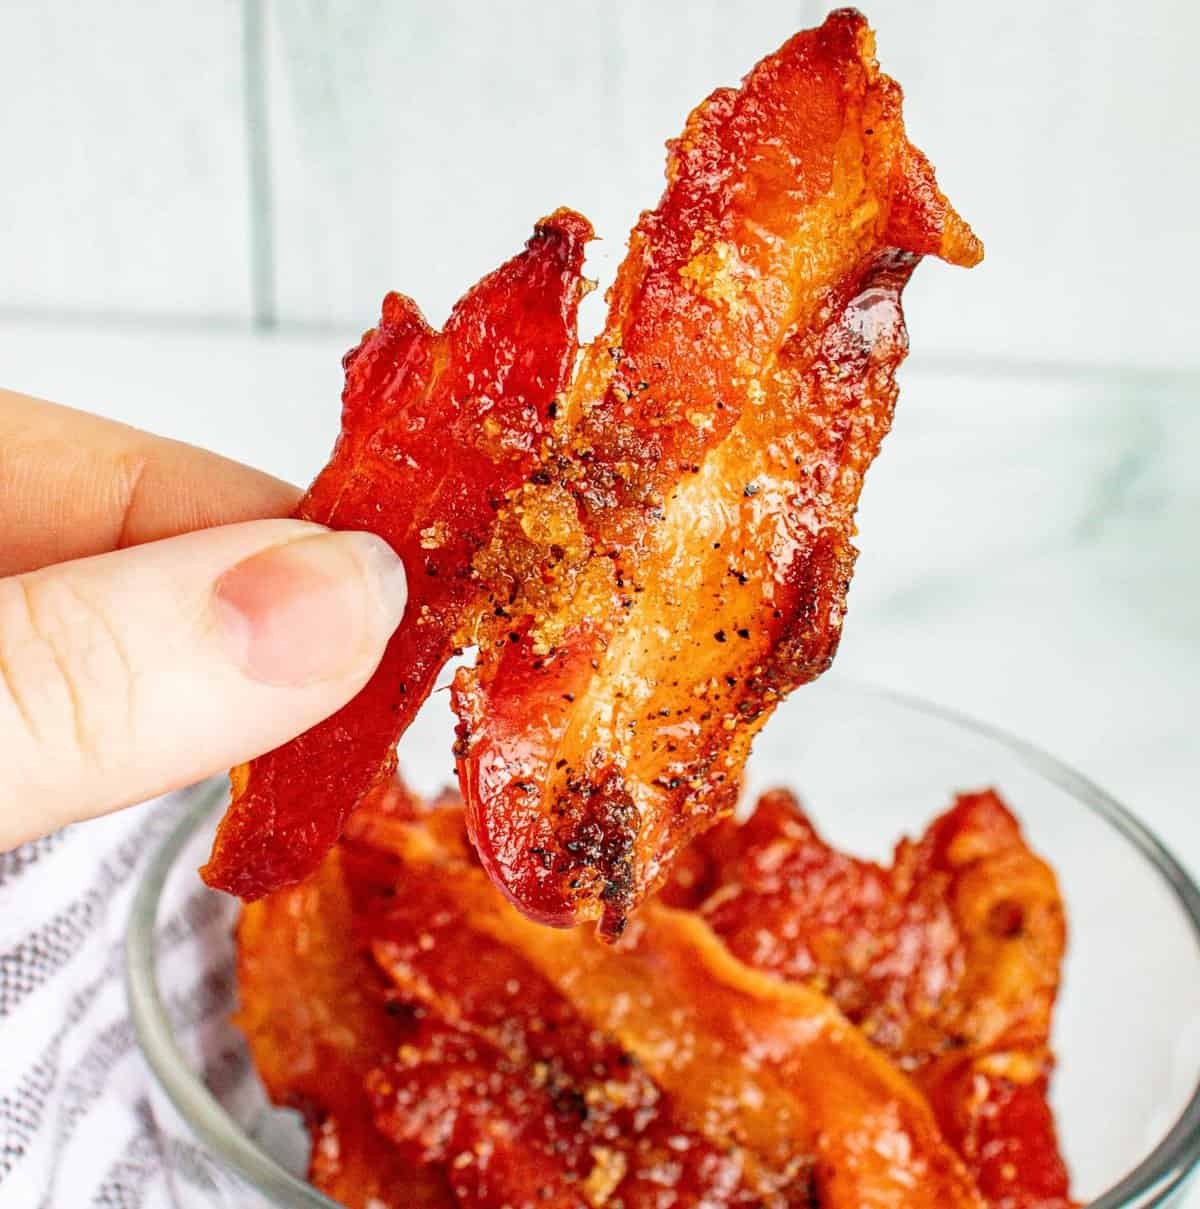 Pig Candy (Candied Bacon)